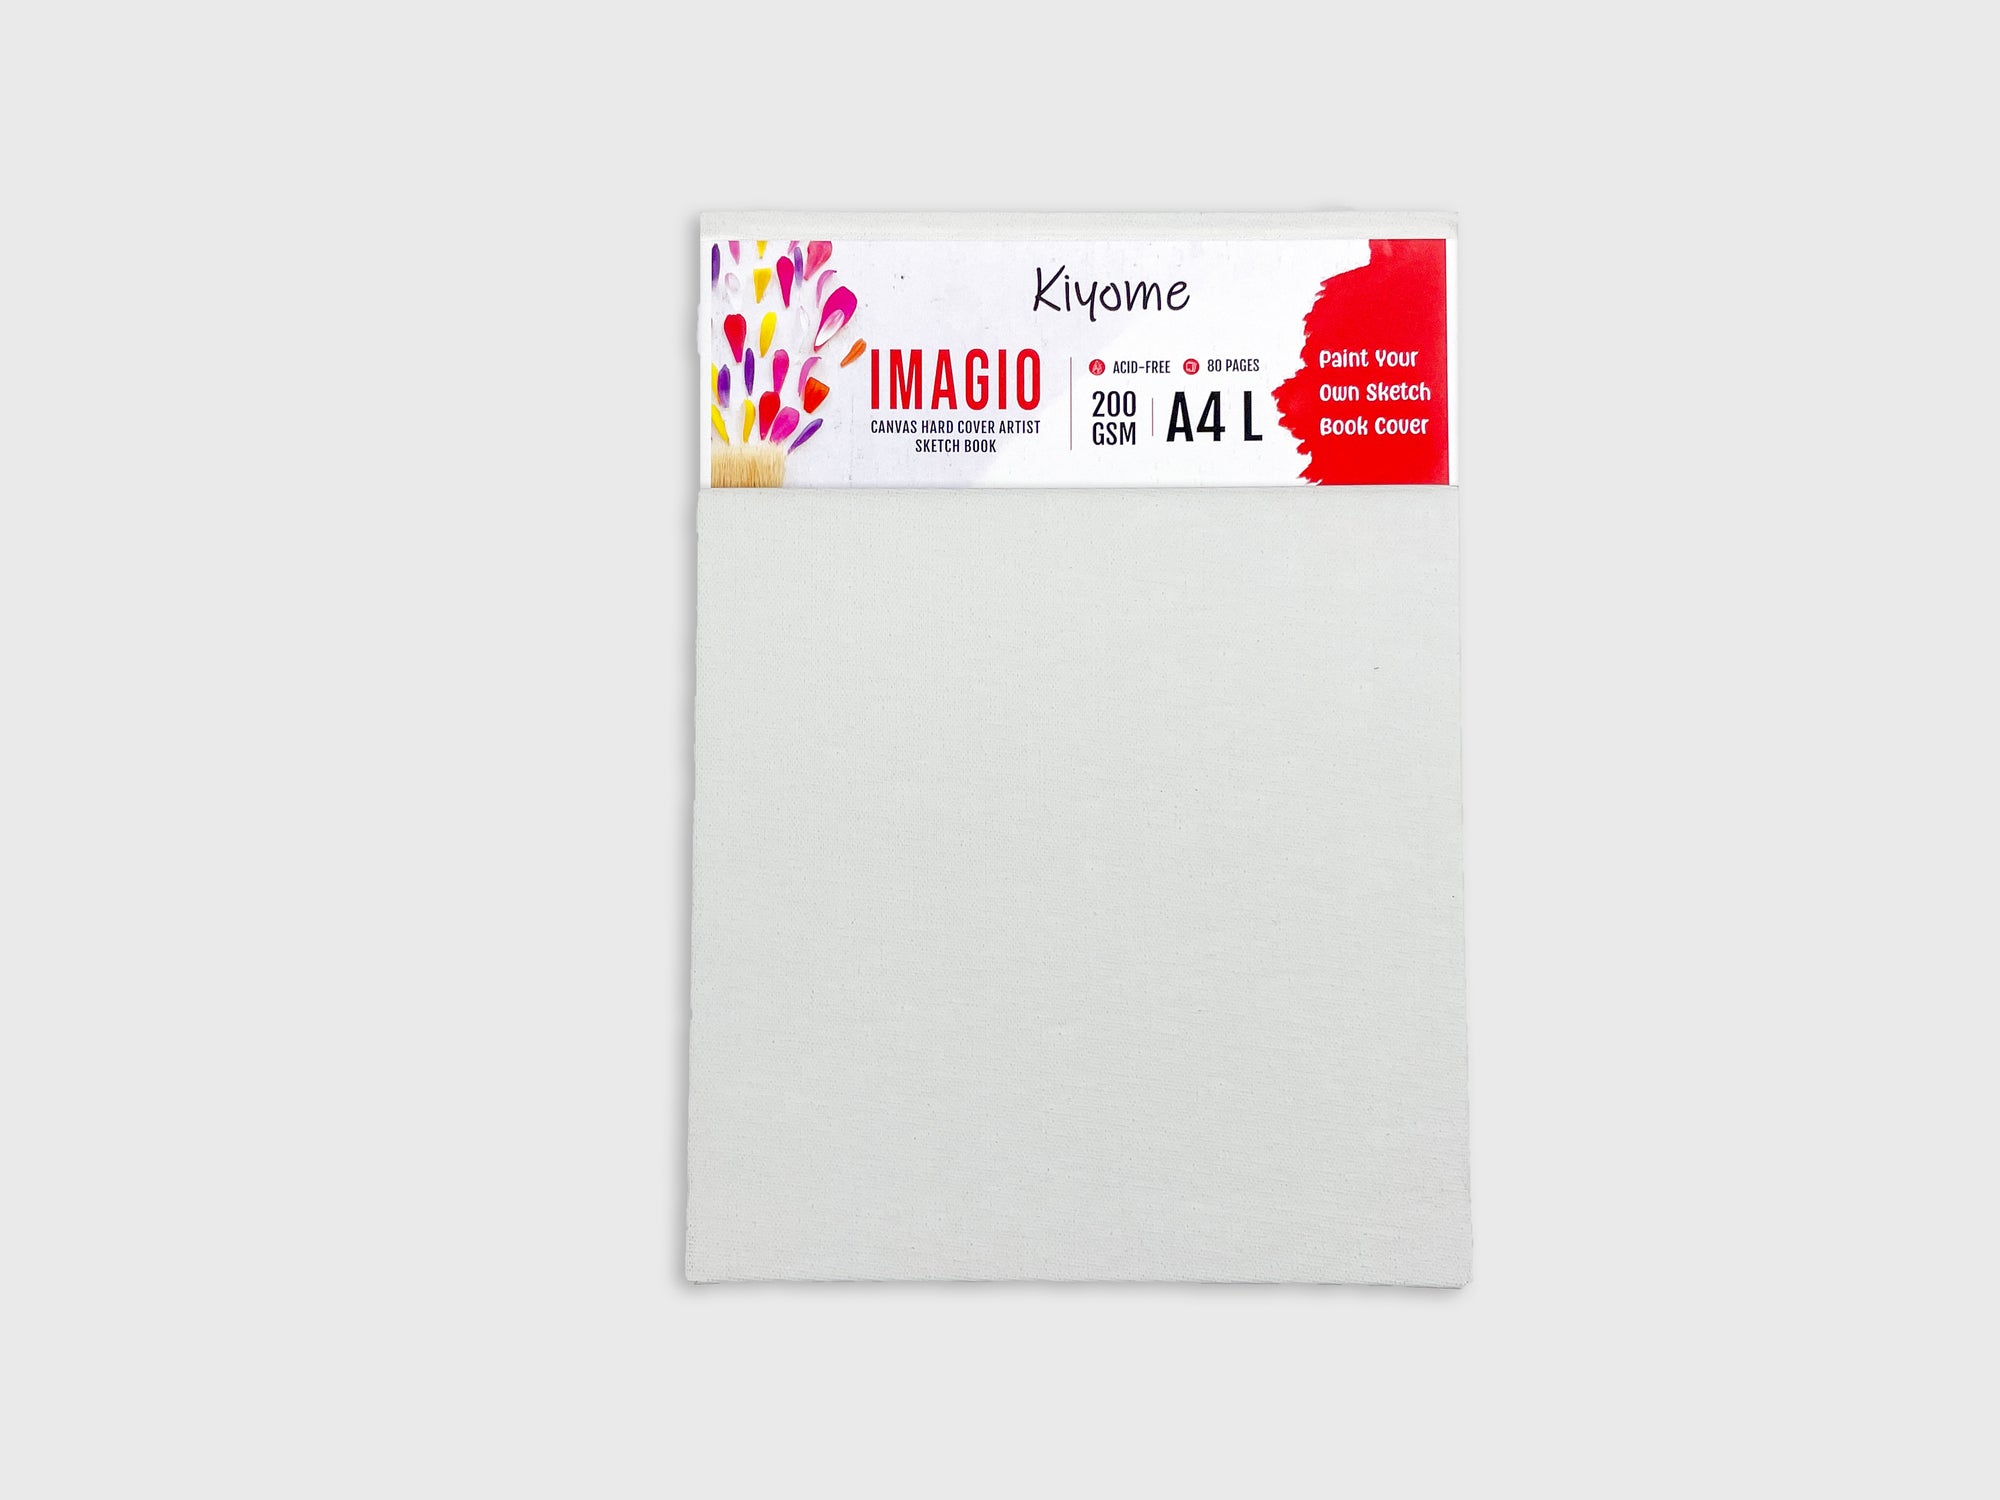 Kiyome Imagio Sketchbook | 200 GSM | A4L | Canvas Cover